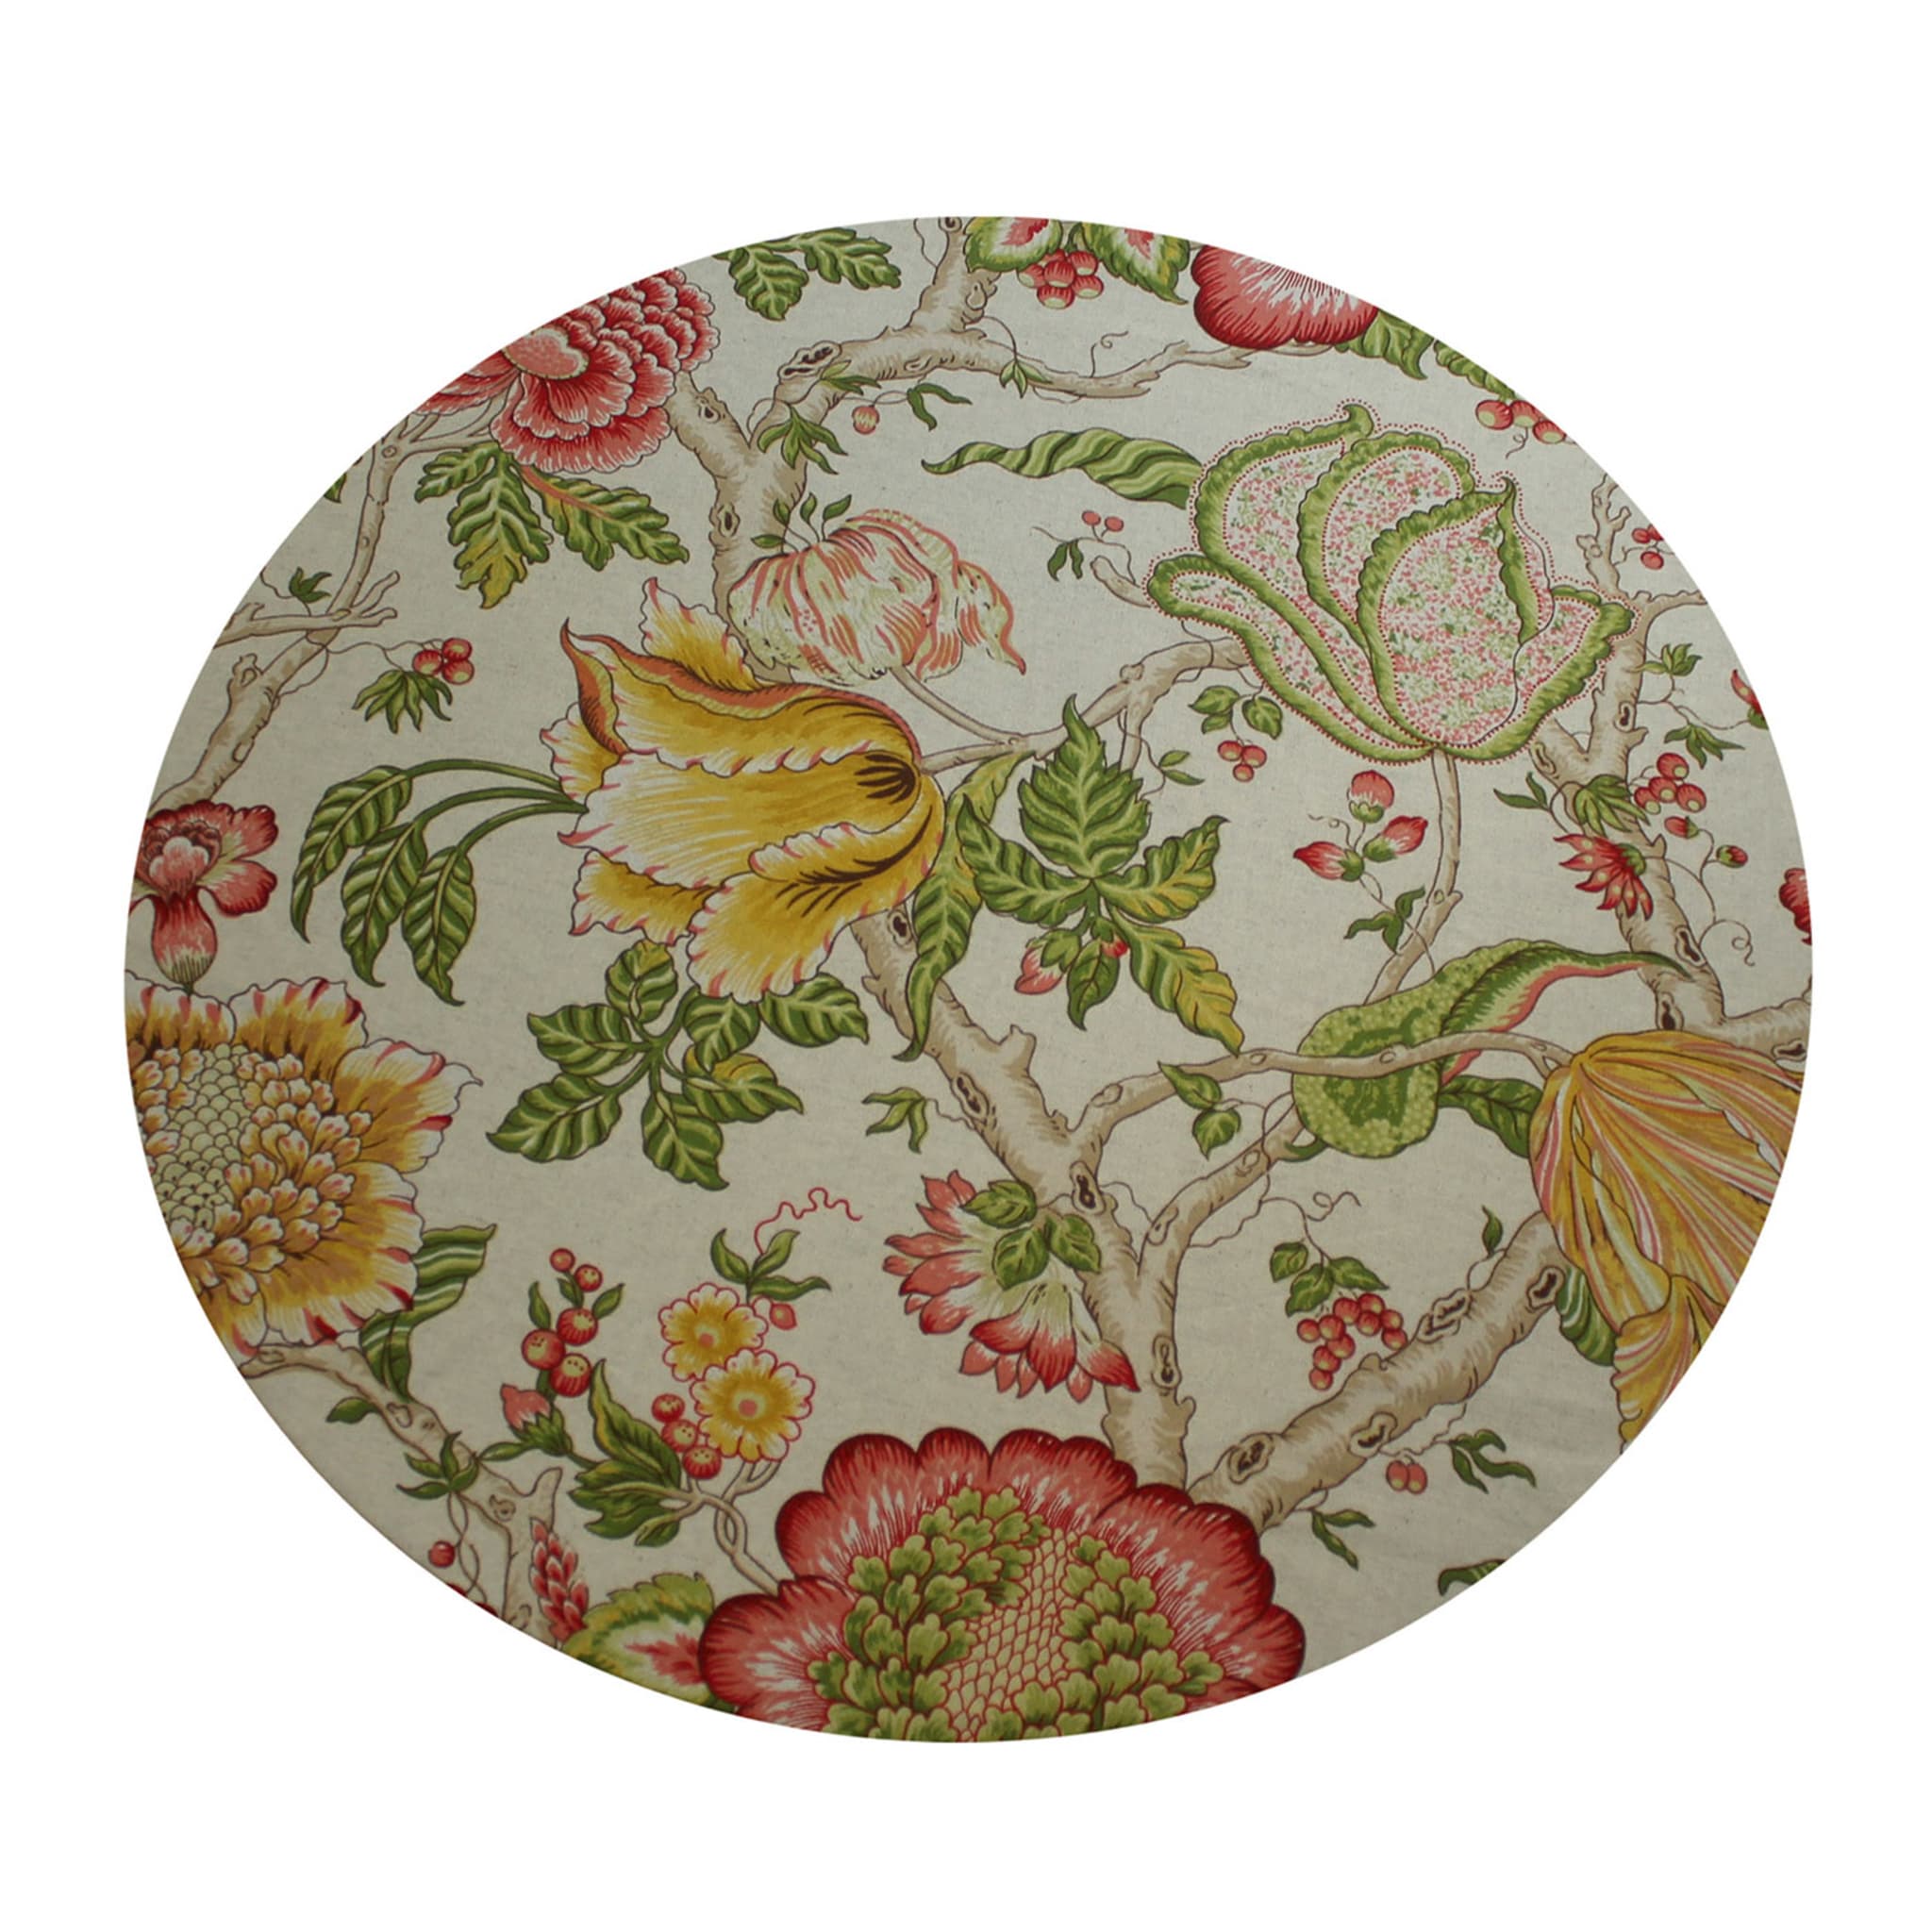 Set of 2 Cuffiette Extra-Small Round Floral Placemats #3 - Main view